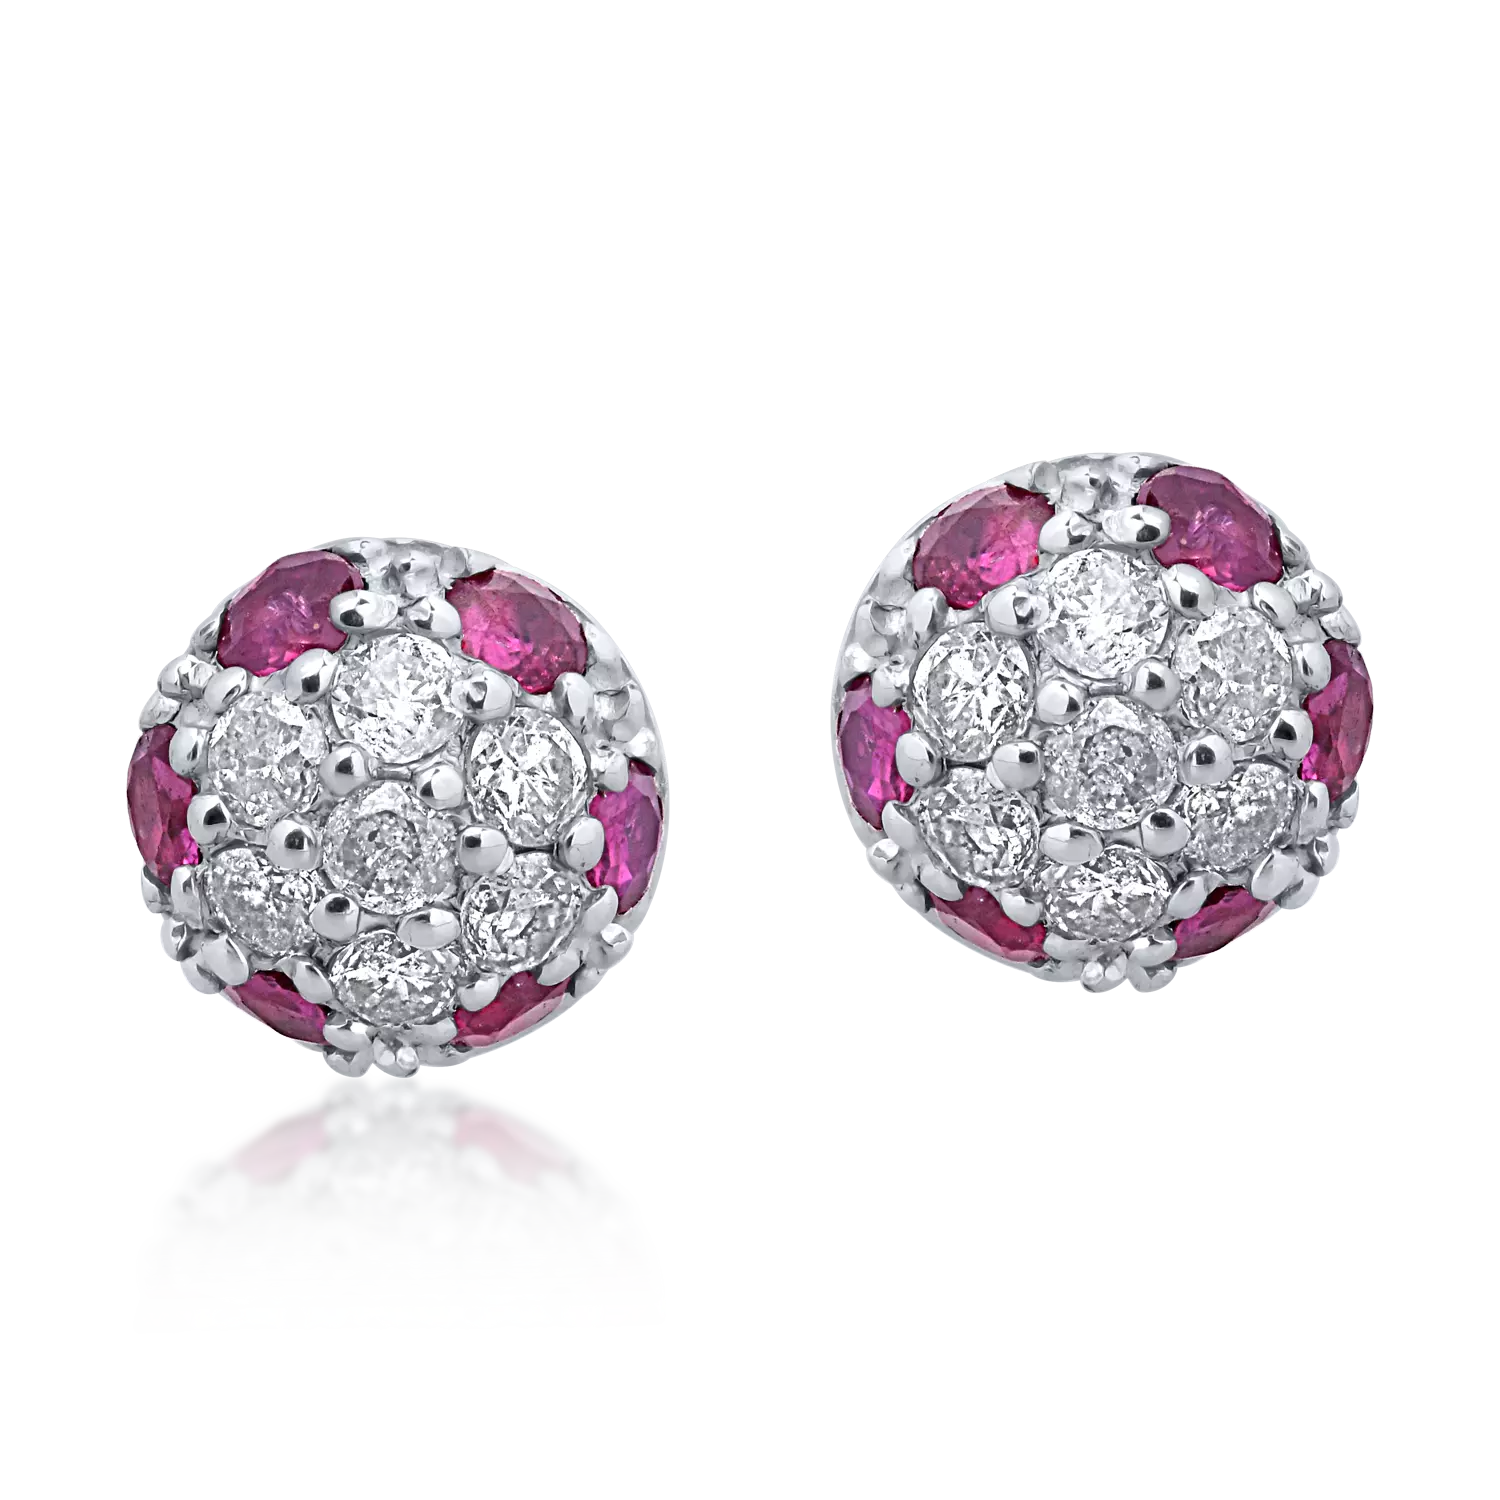 18K white gold earrings with 0.31ct rubies and 0.19ct diamonds